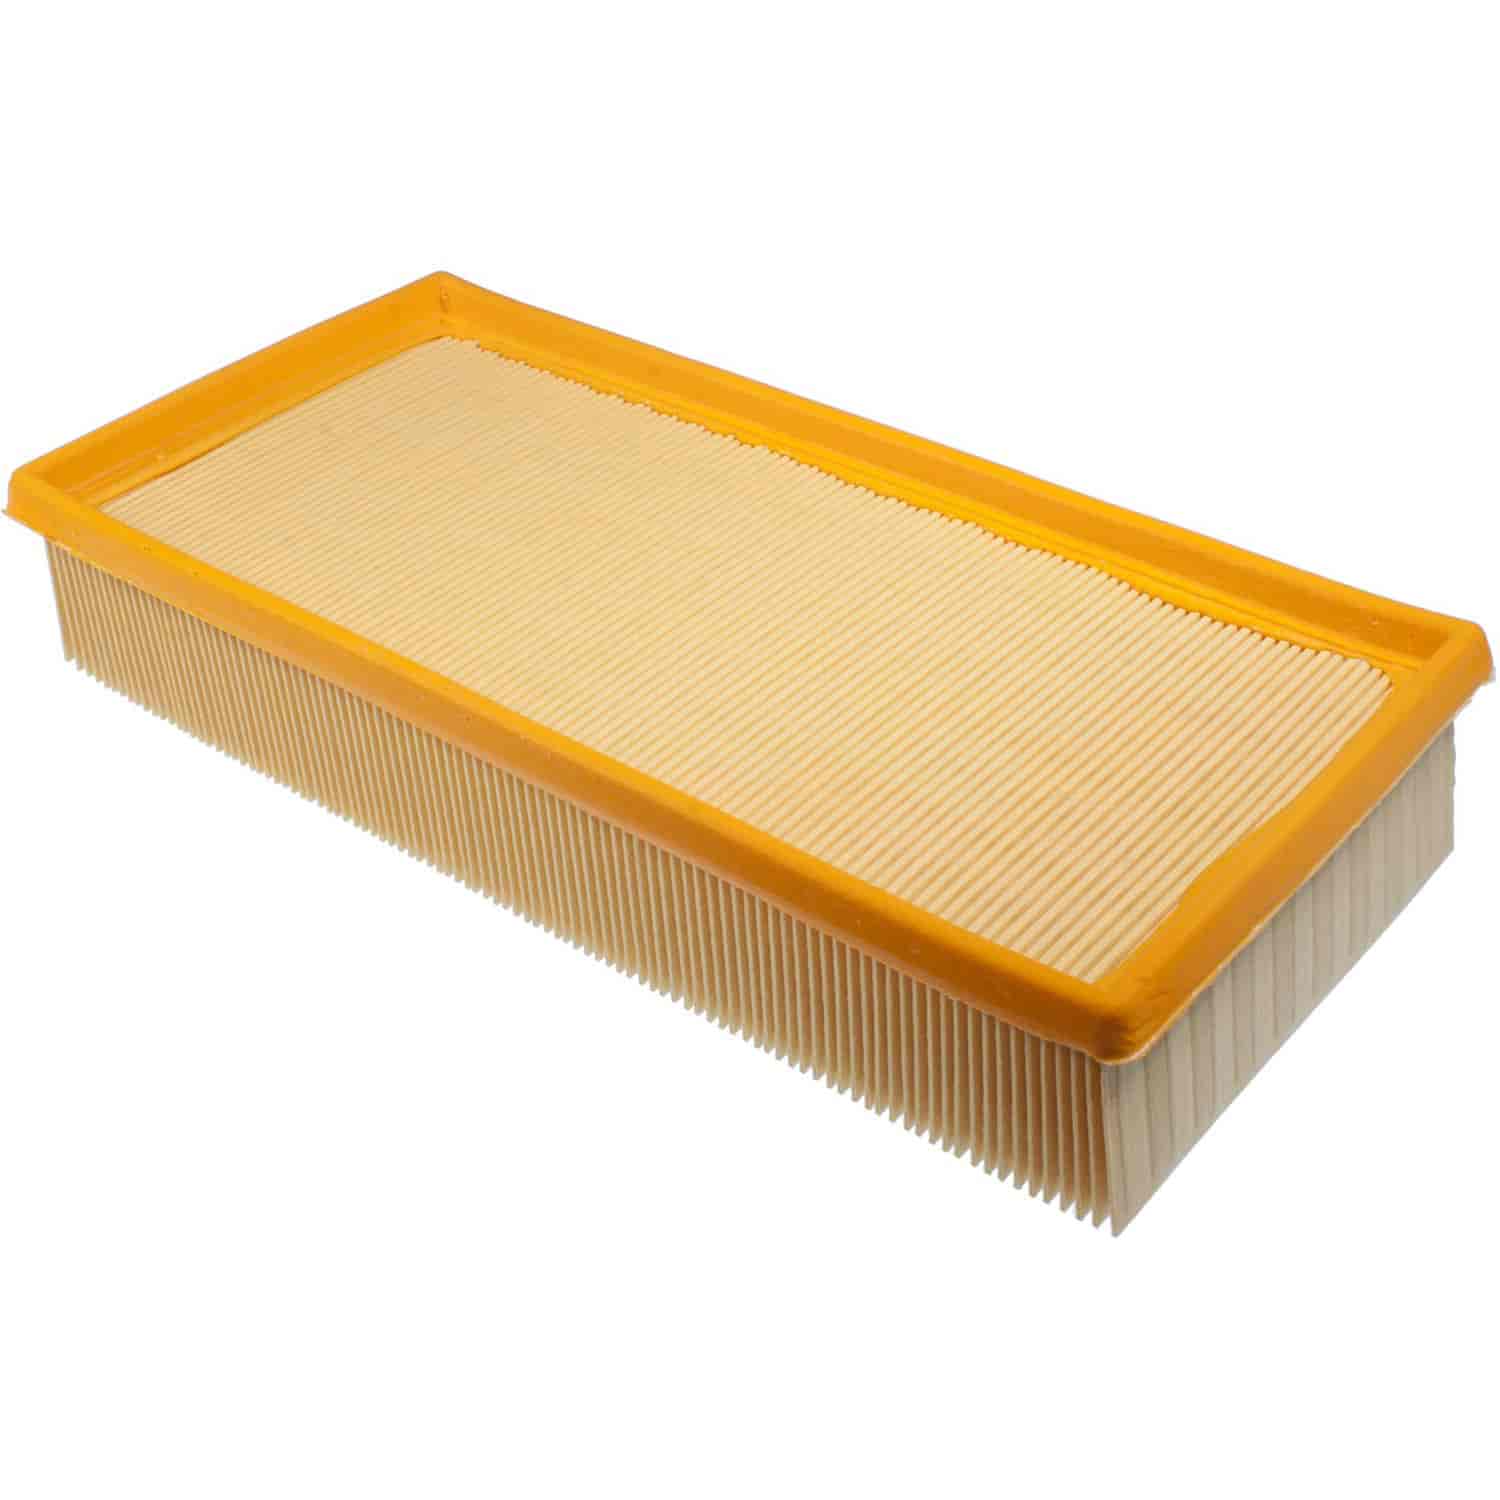 Mahle Air Filter Volvo 440 460 480 1986-1996